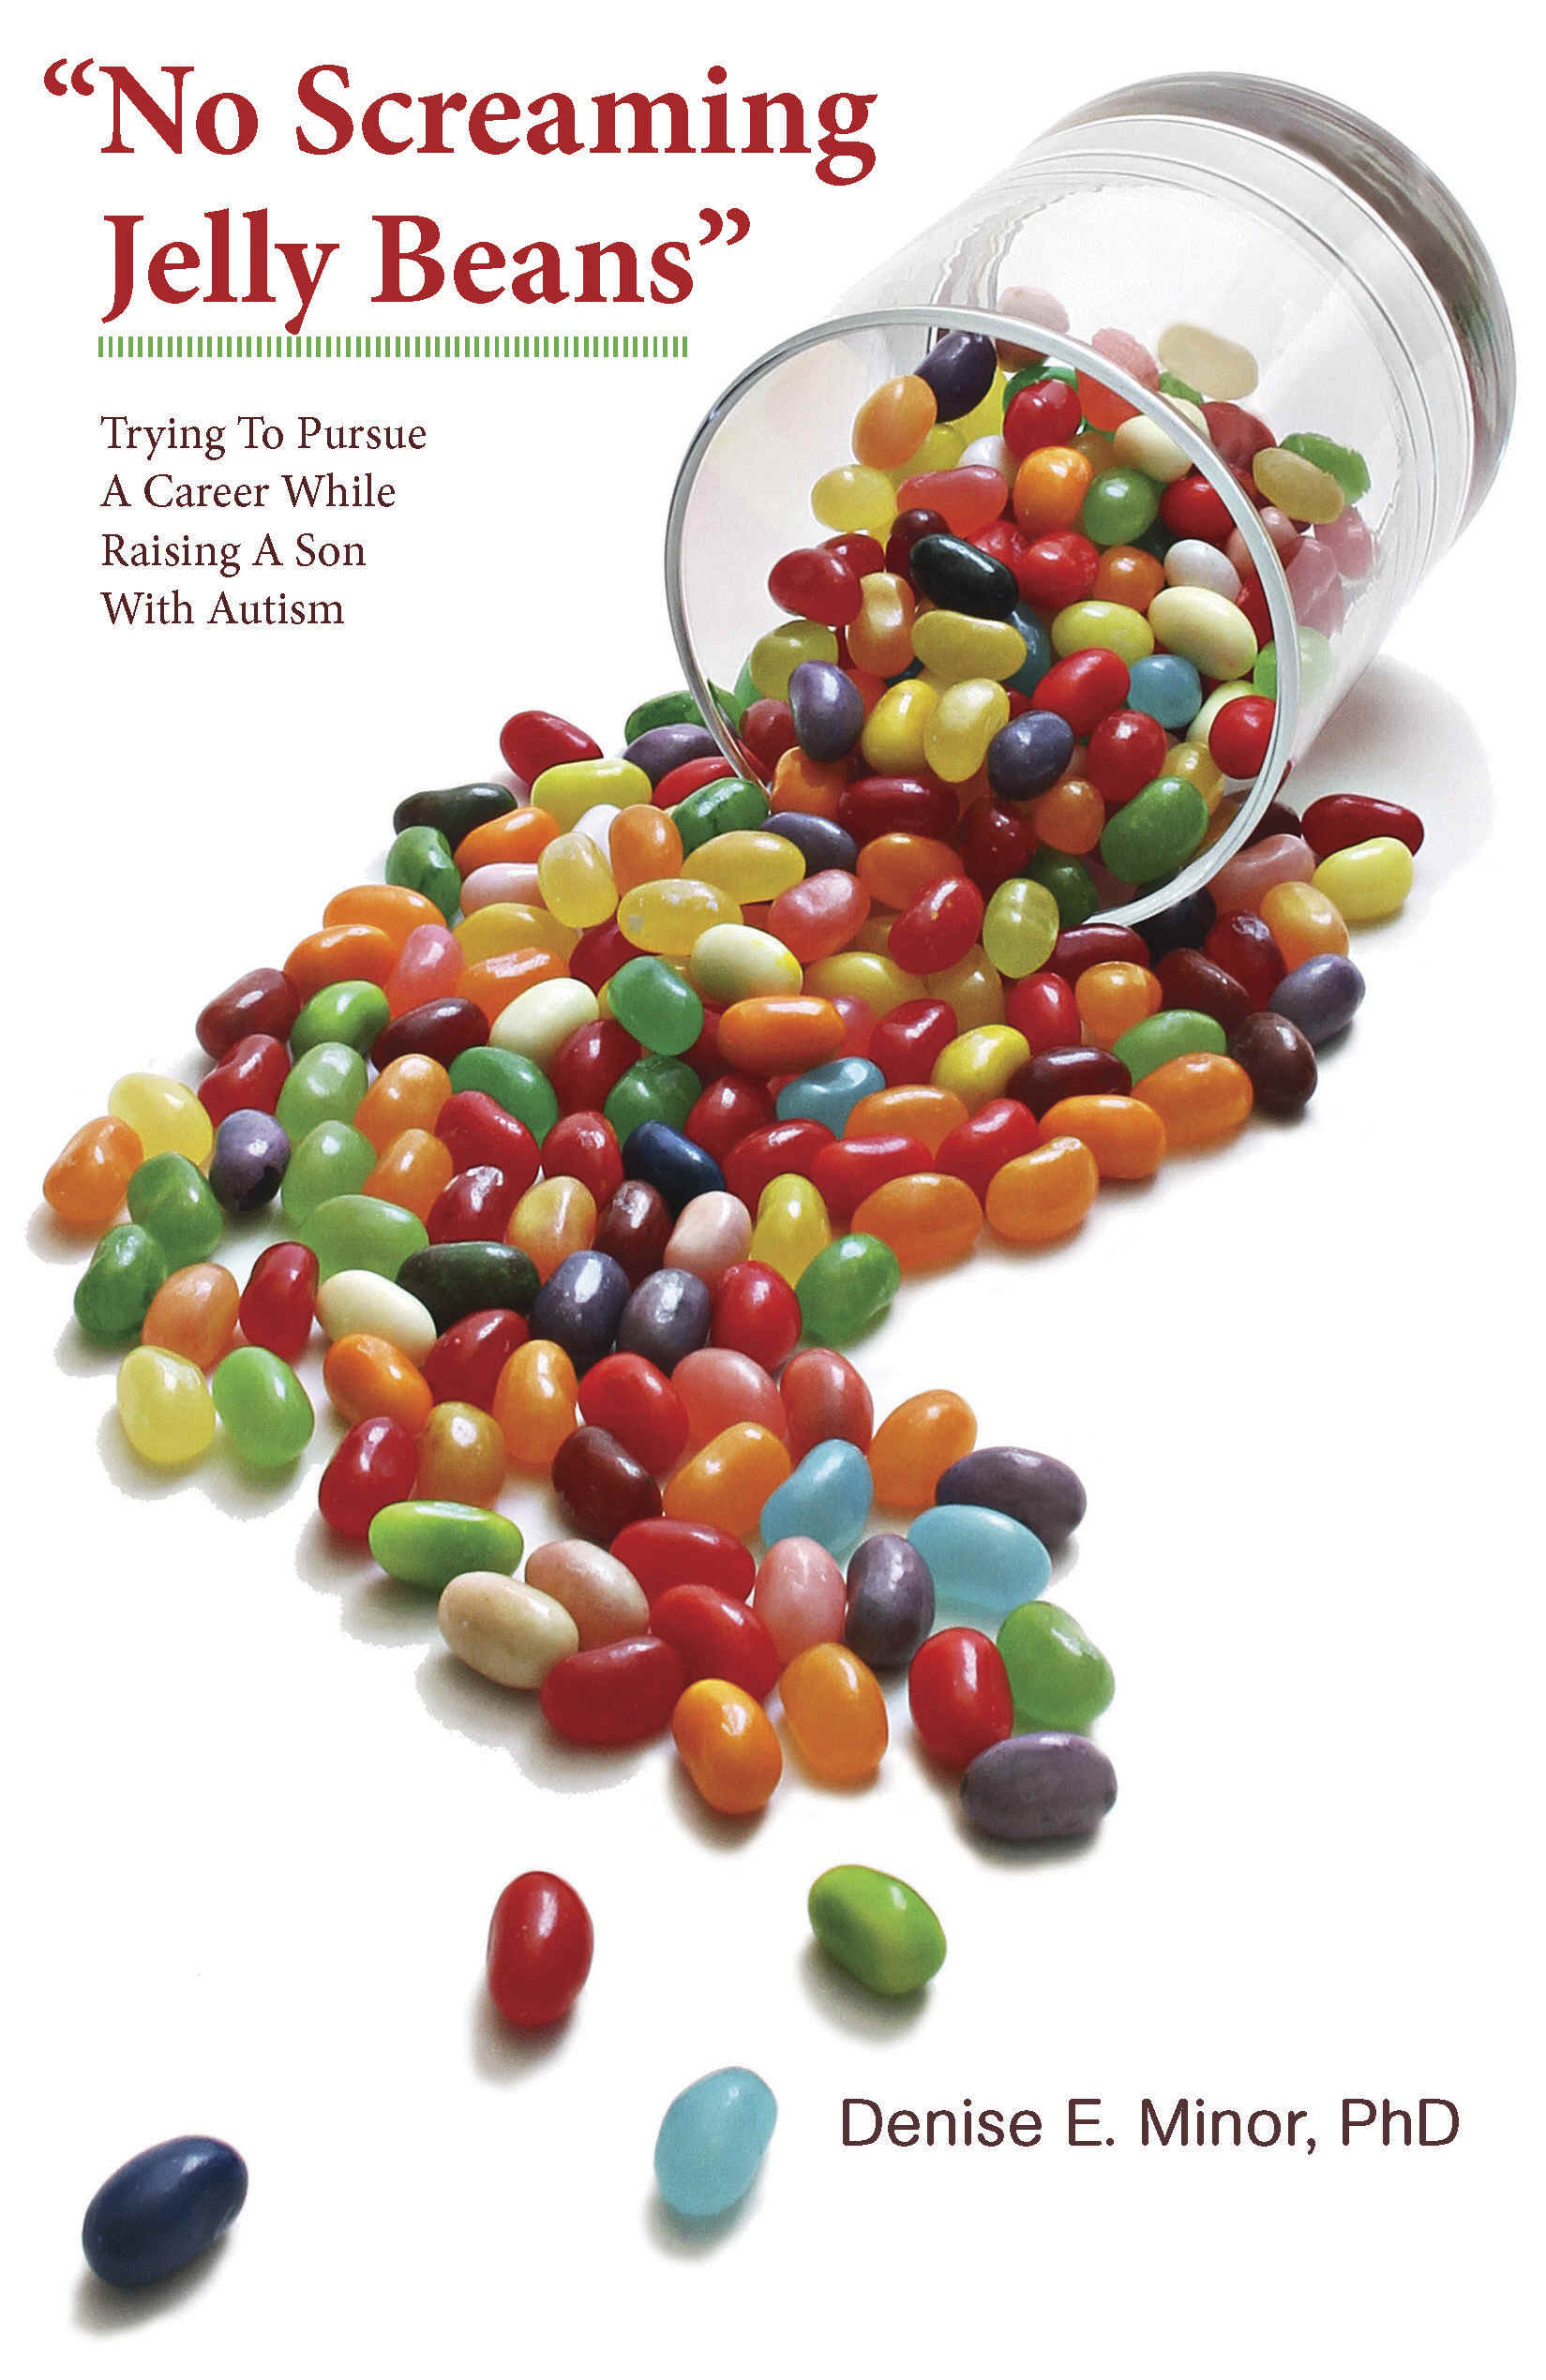 Click to order "No Screaming Jelly Beans" by Denise Minor